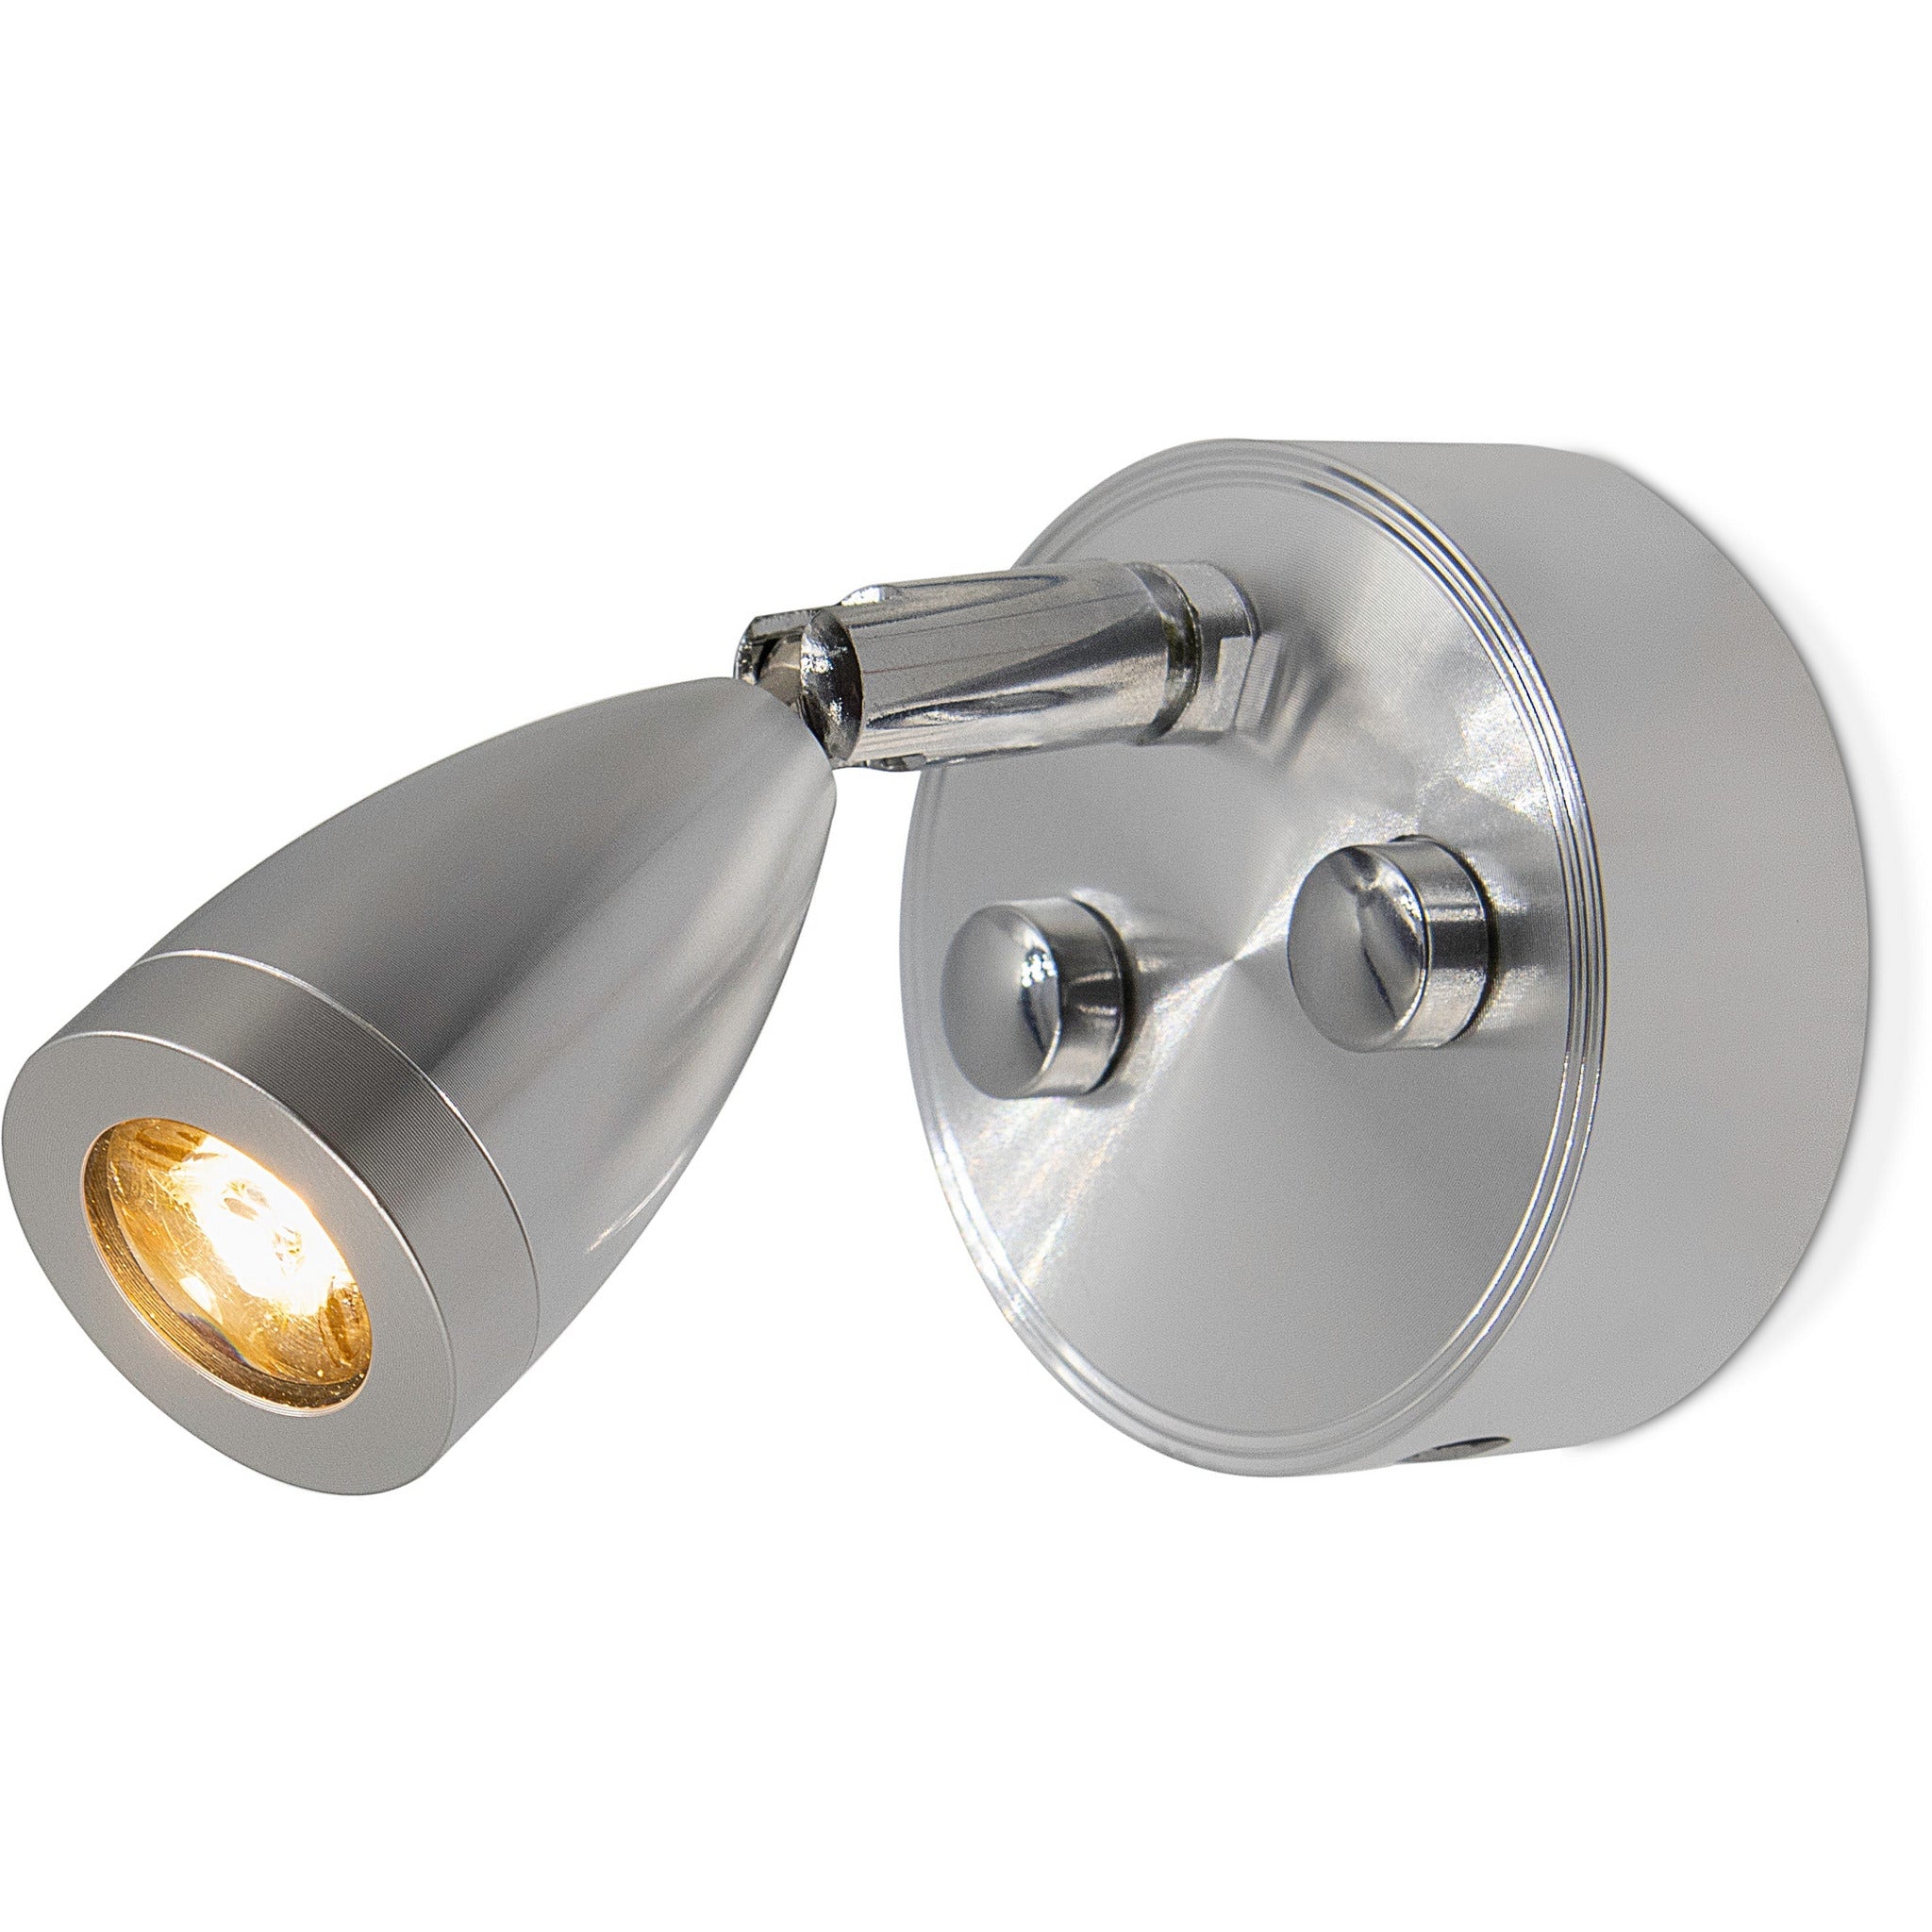 Silver LED 280mm Spotlight with USB - Dimmable, Touch On/Off (Warm White) Kiravans 